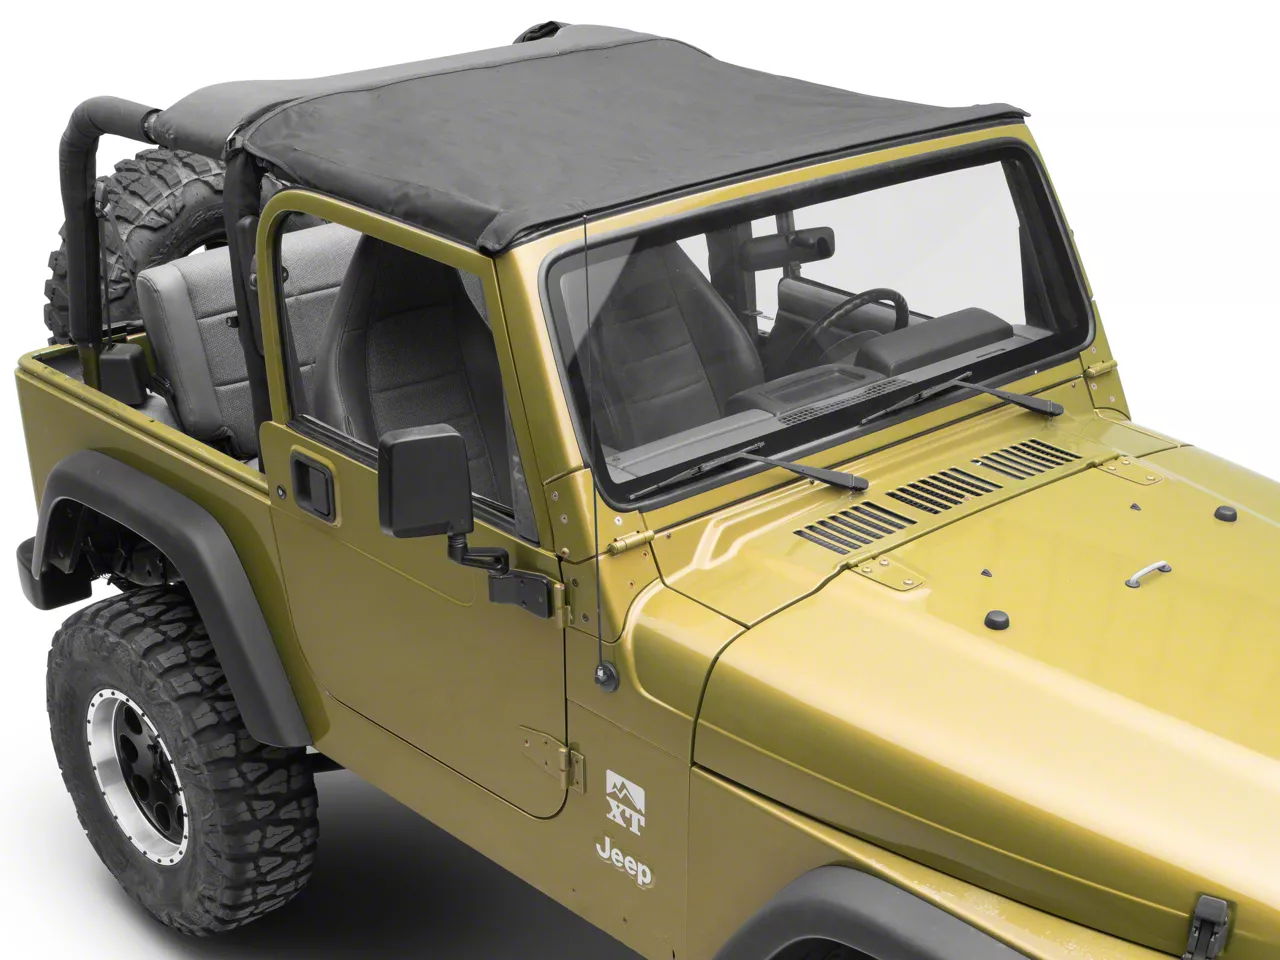 Jeep TJ Soft Tops u0026 Soft Top Accessories for Wrangler (1997-2006) |  ExtremeTerrain